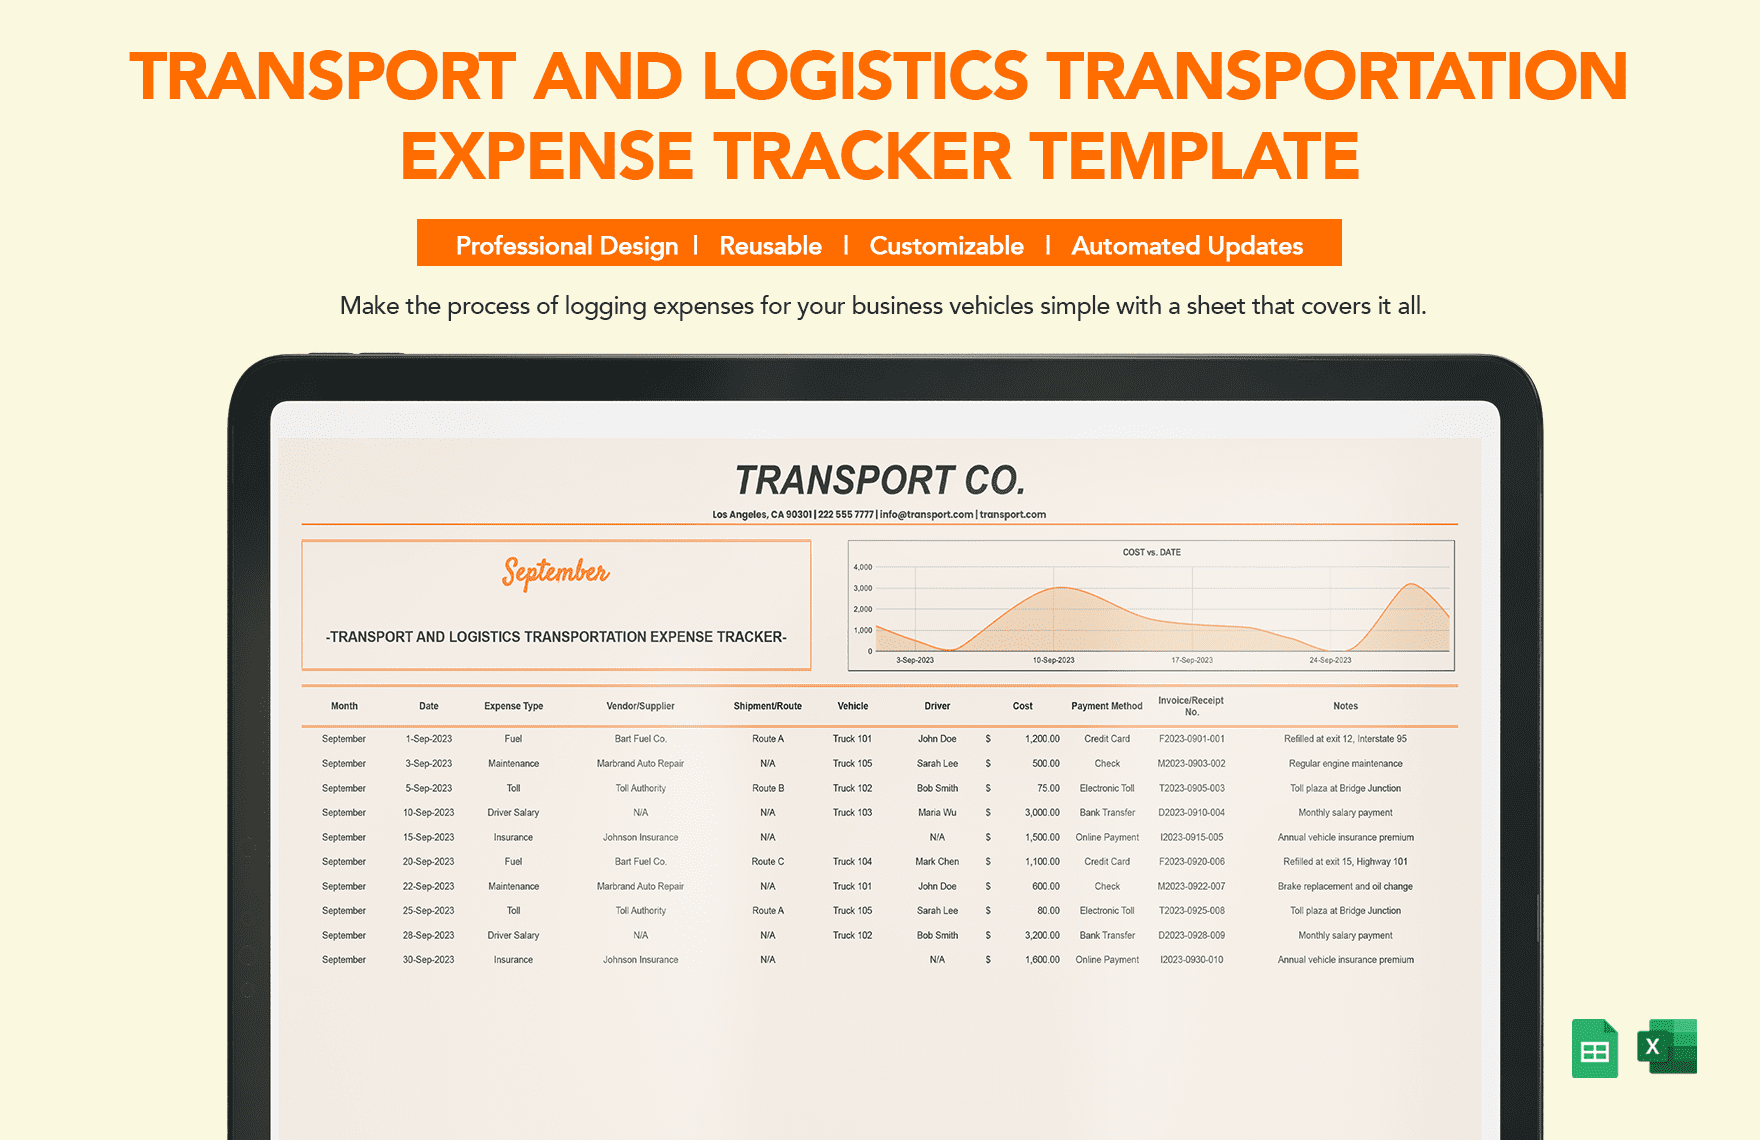 Transport and Logistics Transportation Expense Tracker Template in Excel, Google Sheets